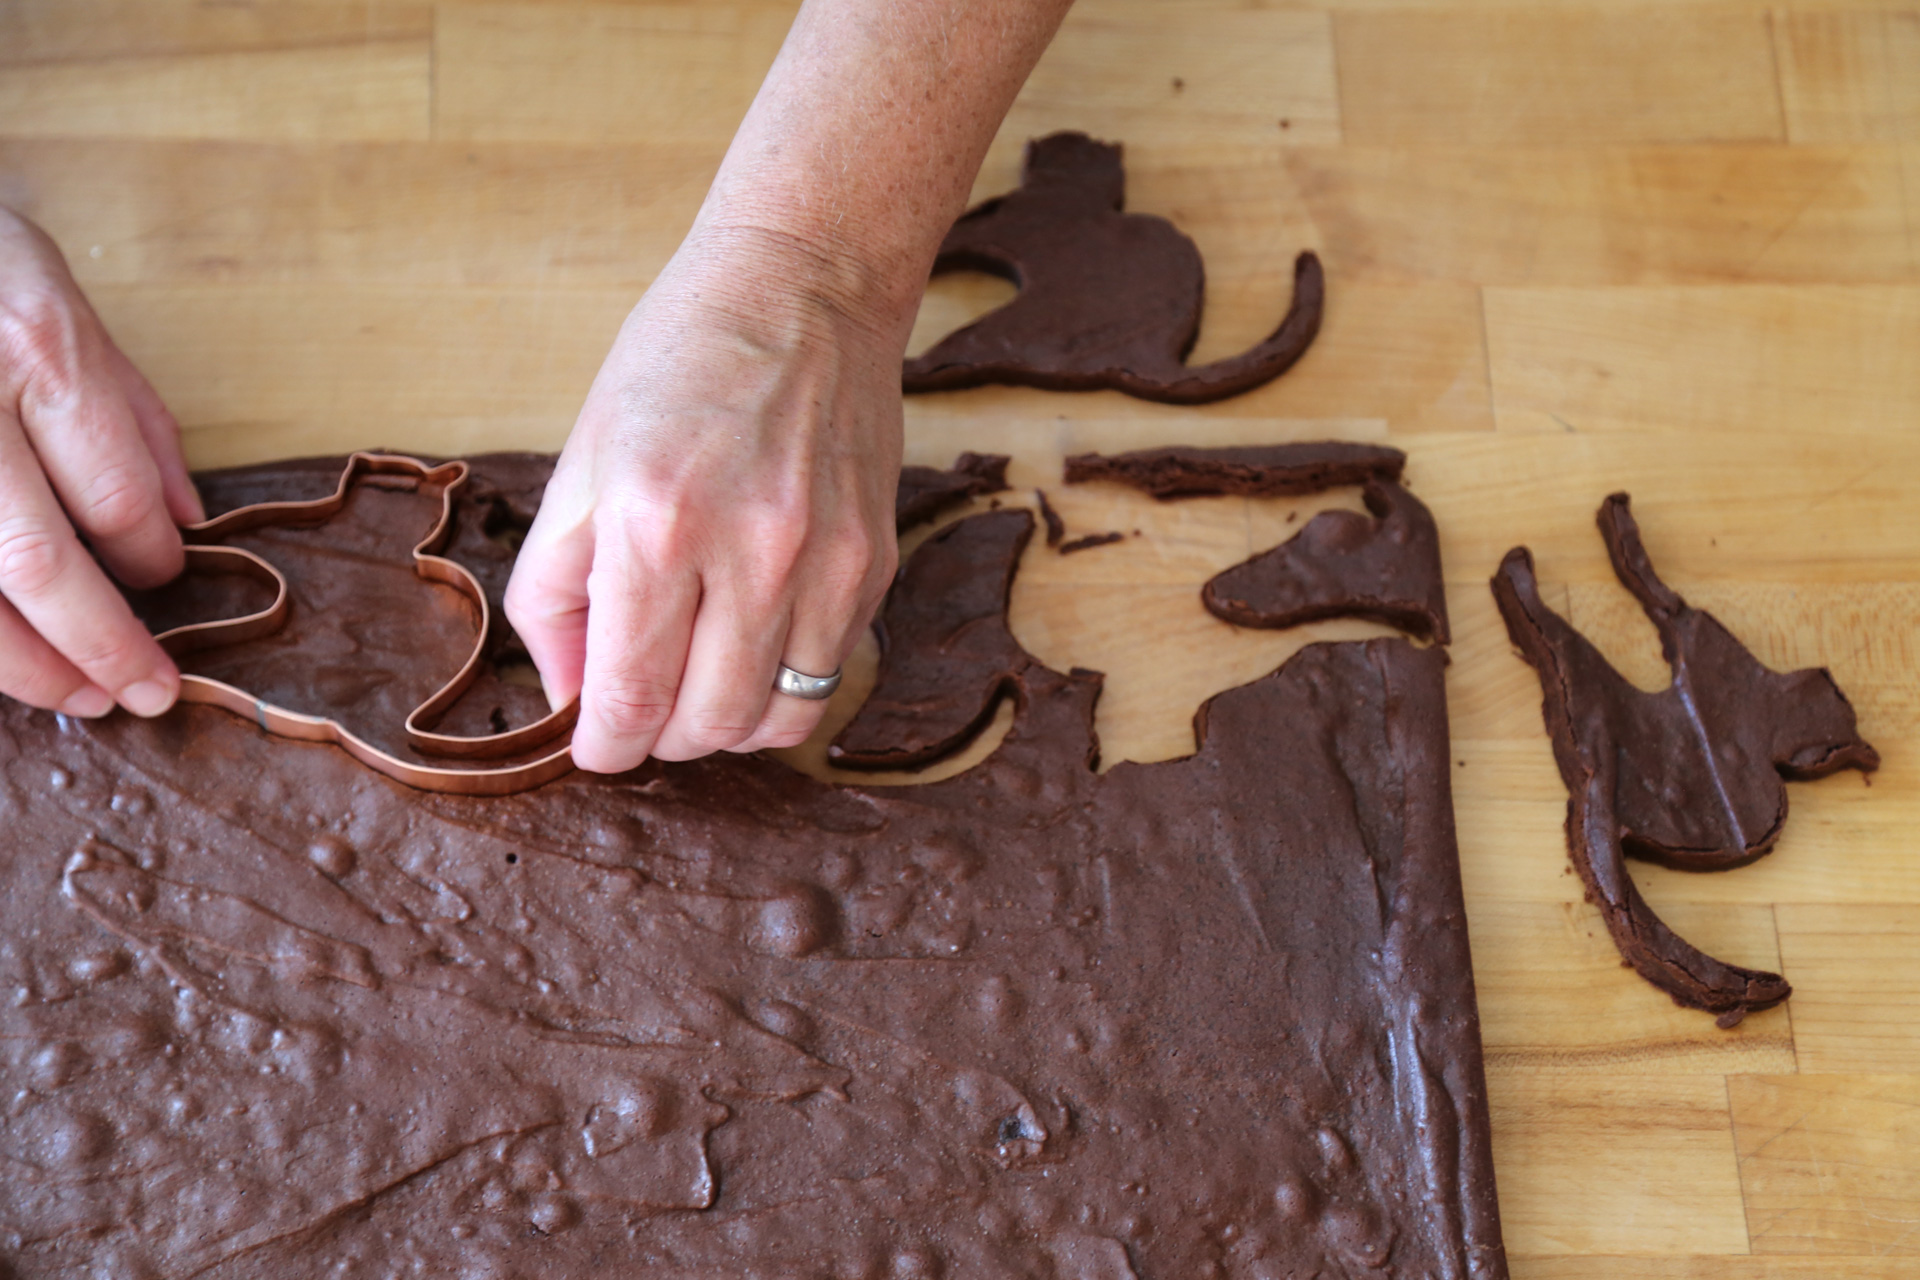 Using your favorite shaped cookie cutter, cut out as many brownie cookies as possible.